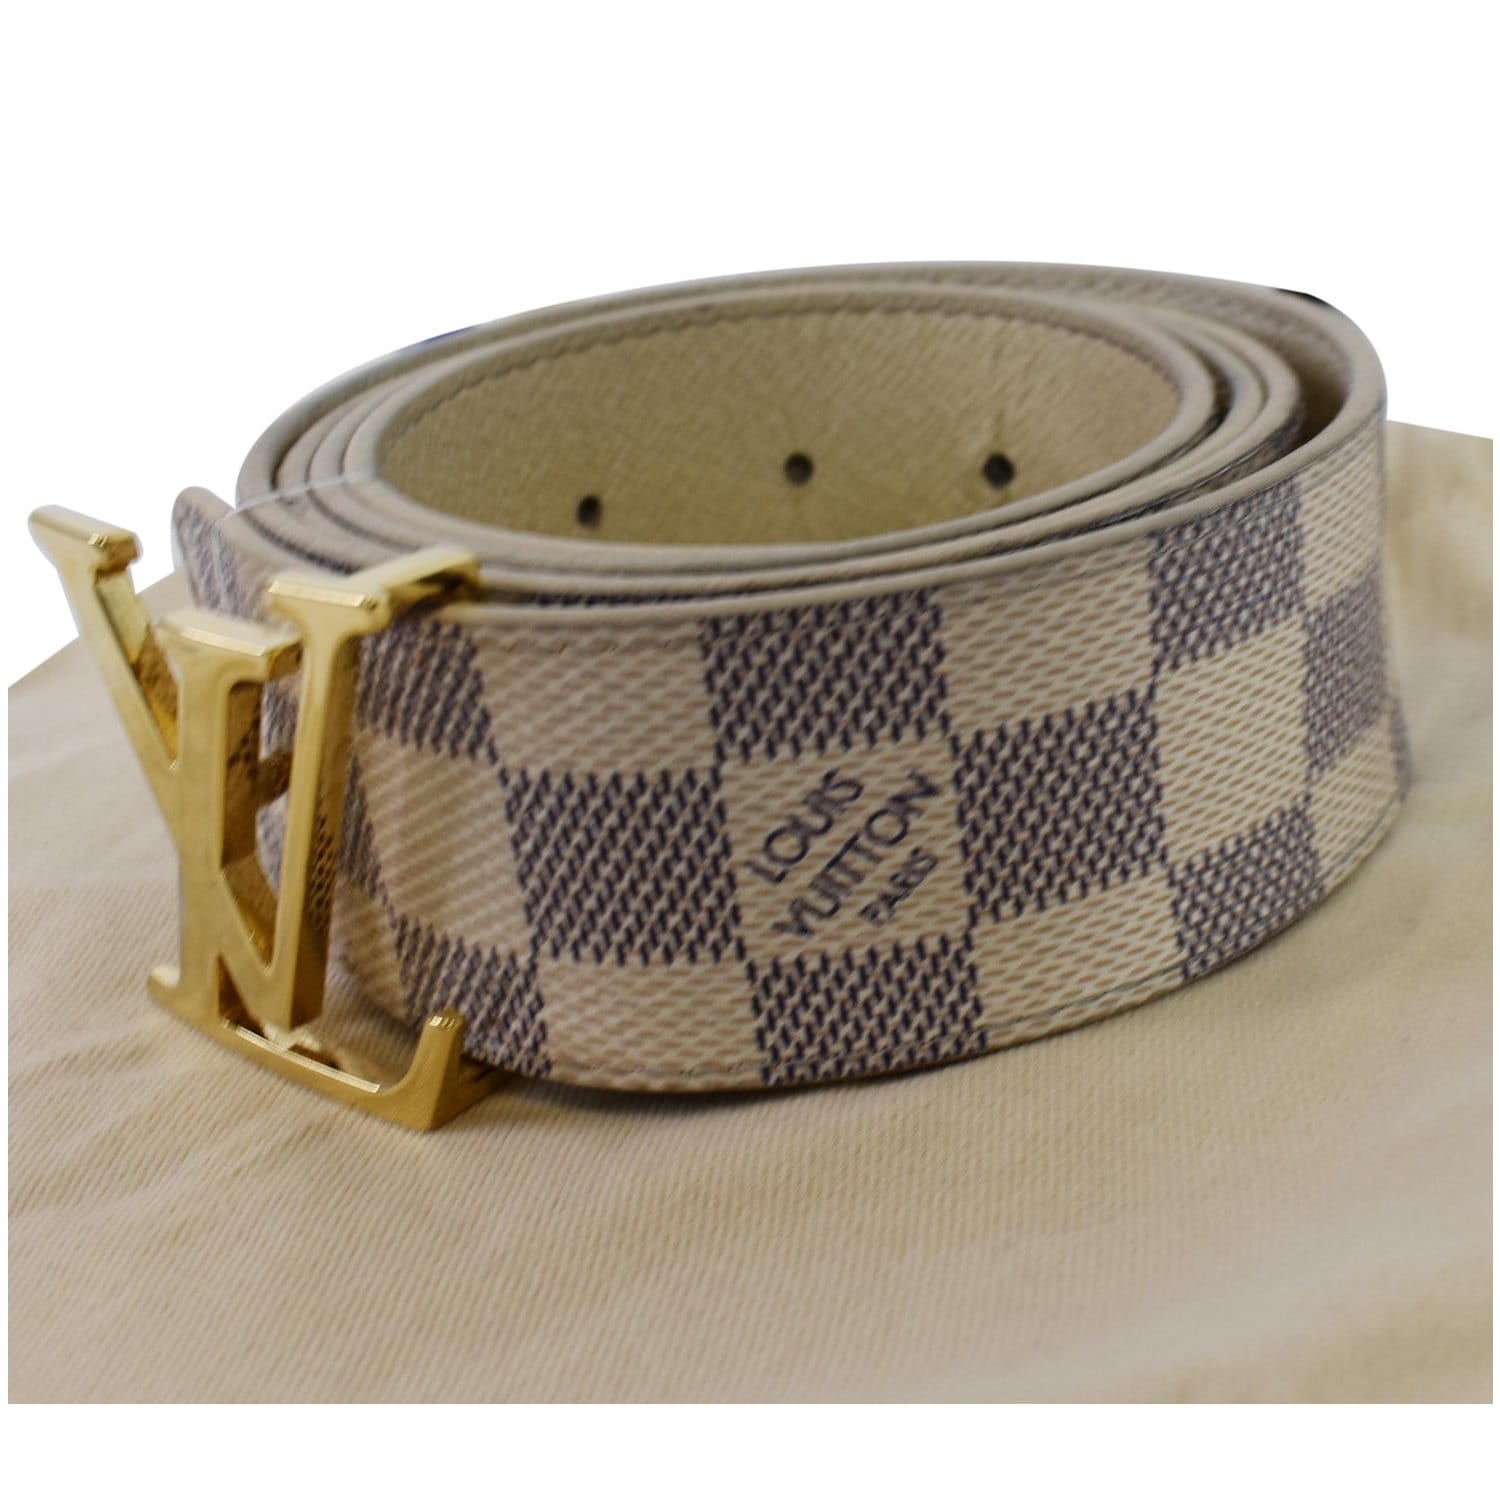 Game in Louis Vuitton Initiales Damier Azur belt and Tower High